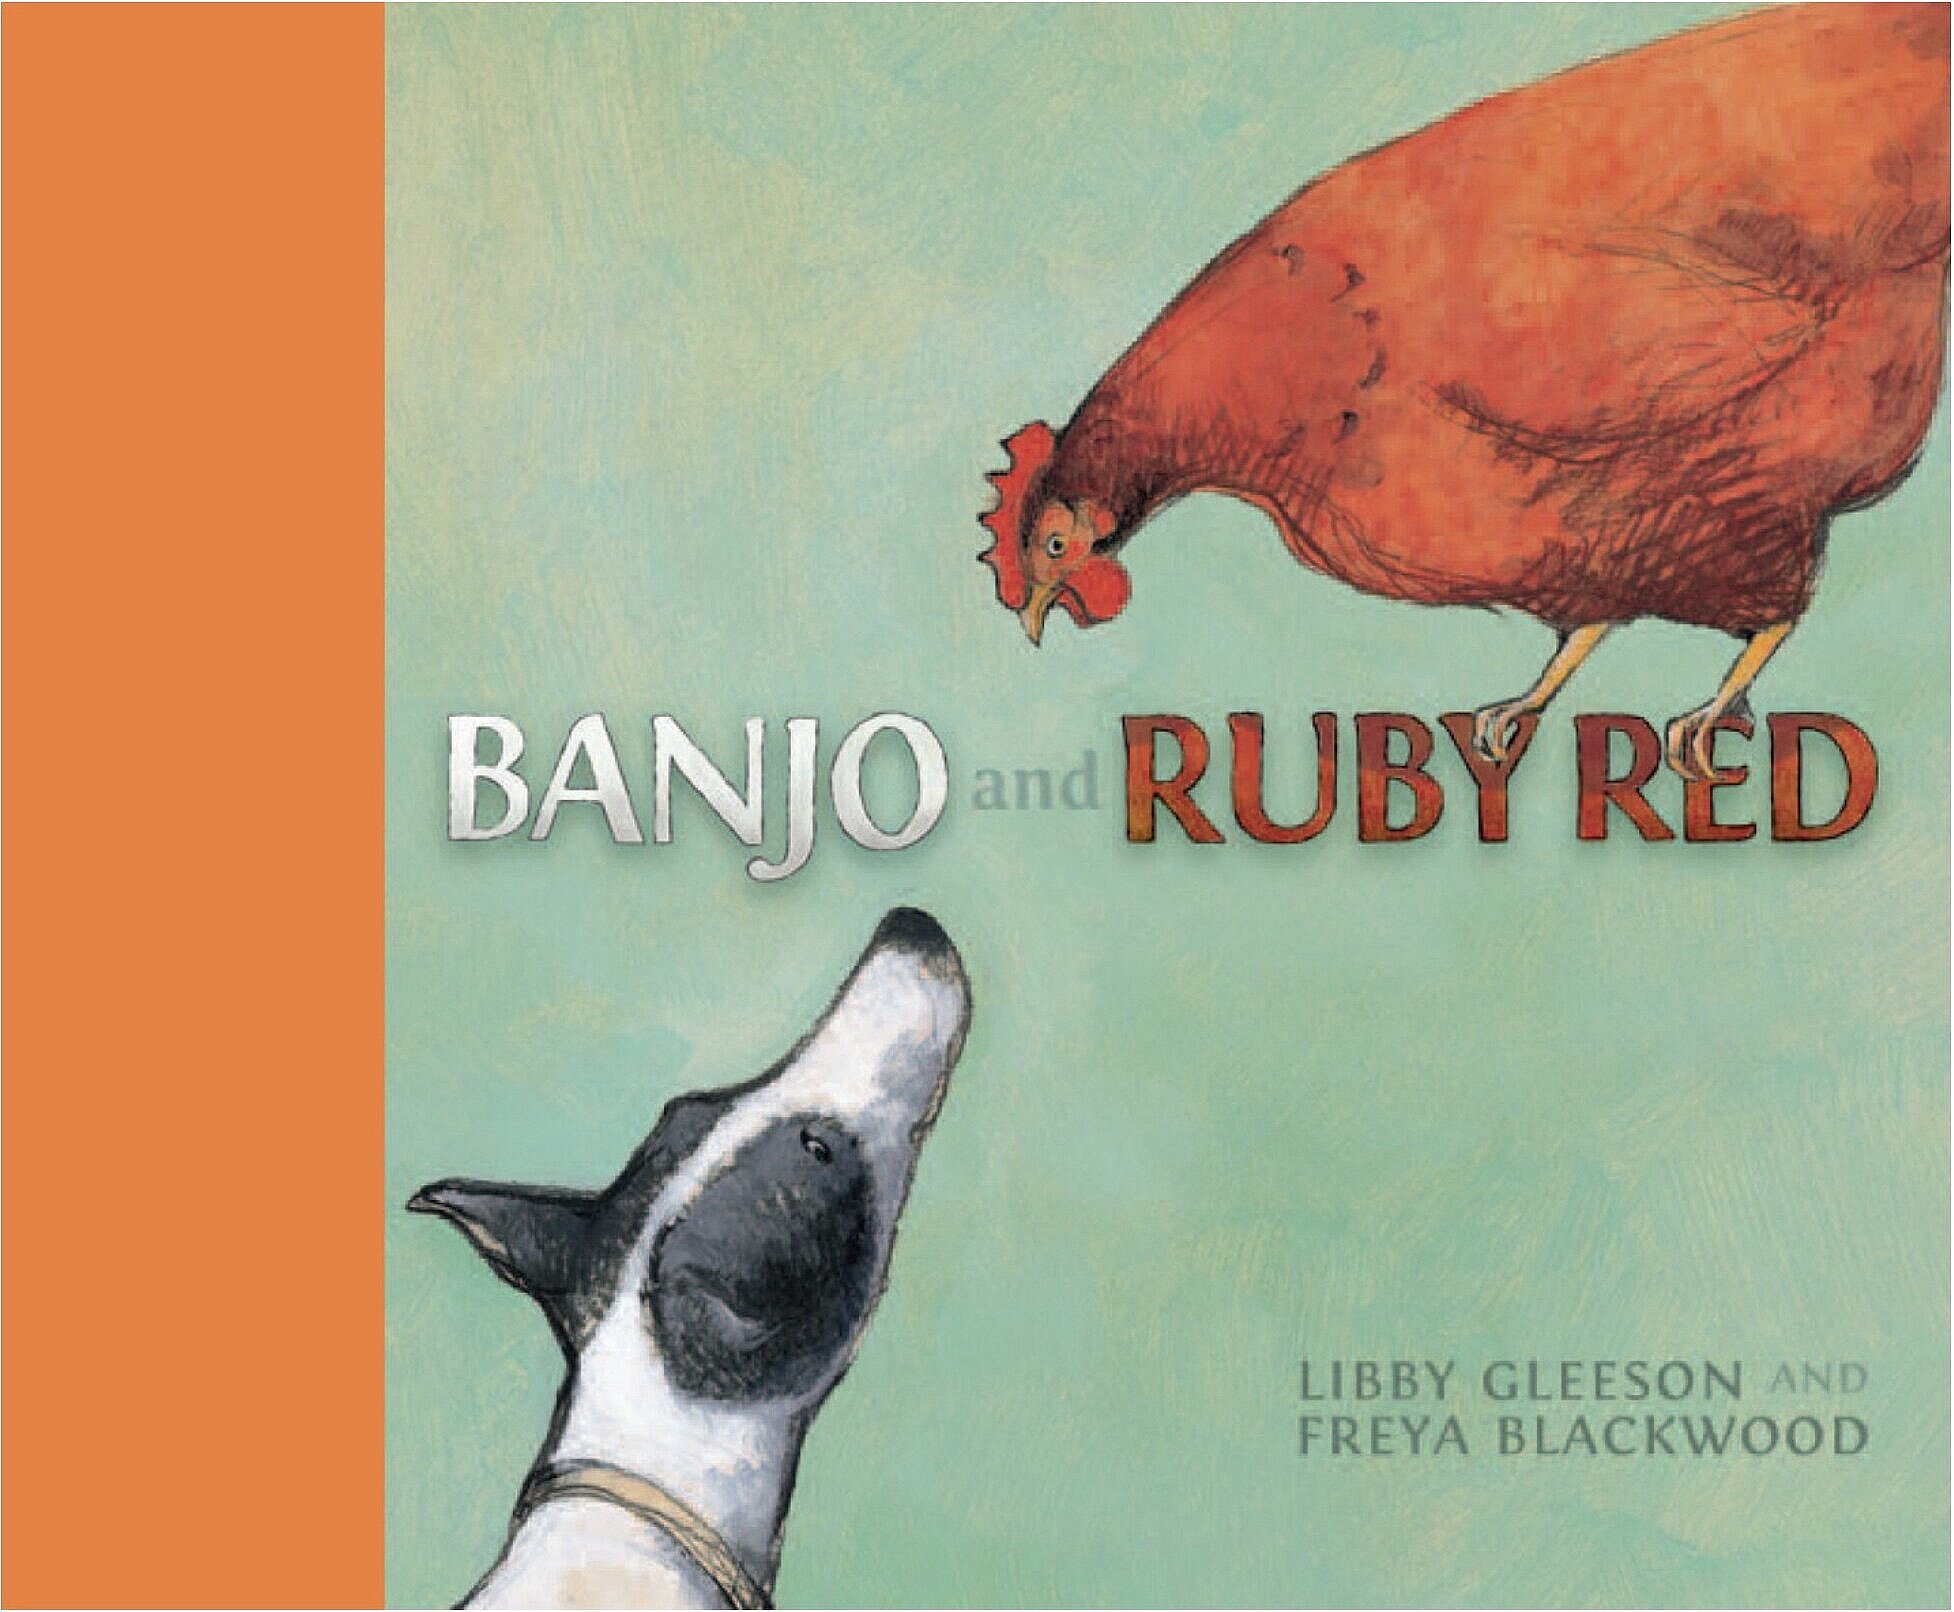 Banjo+%26+ruby+red+cover+small.jpg